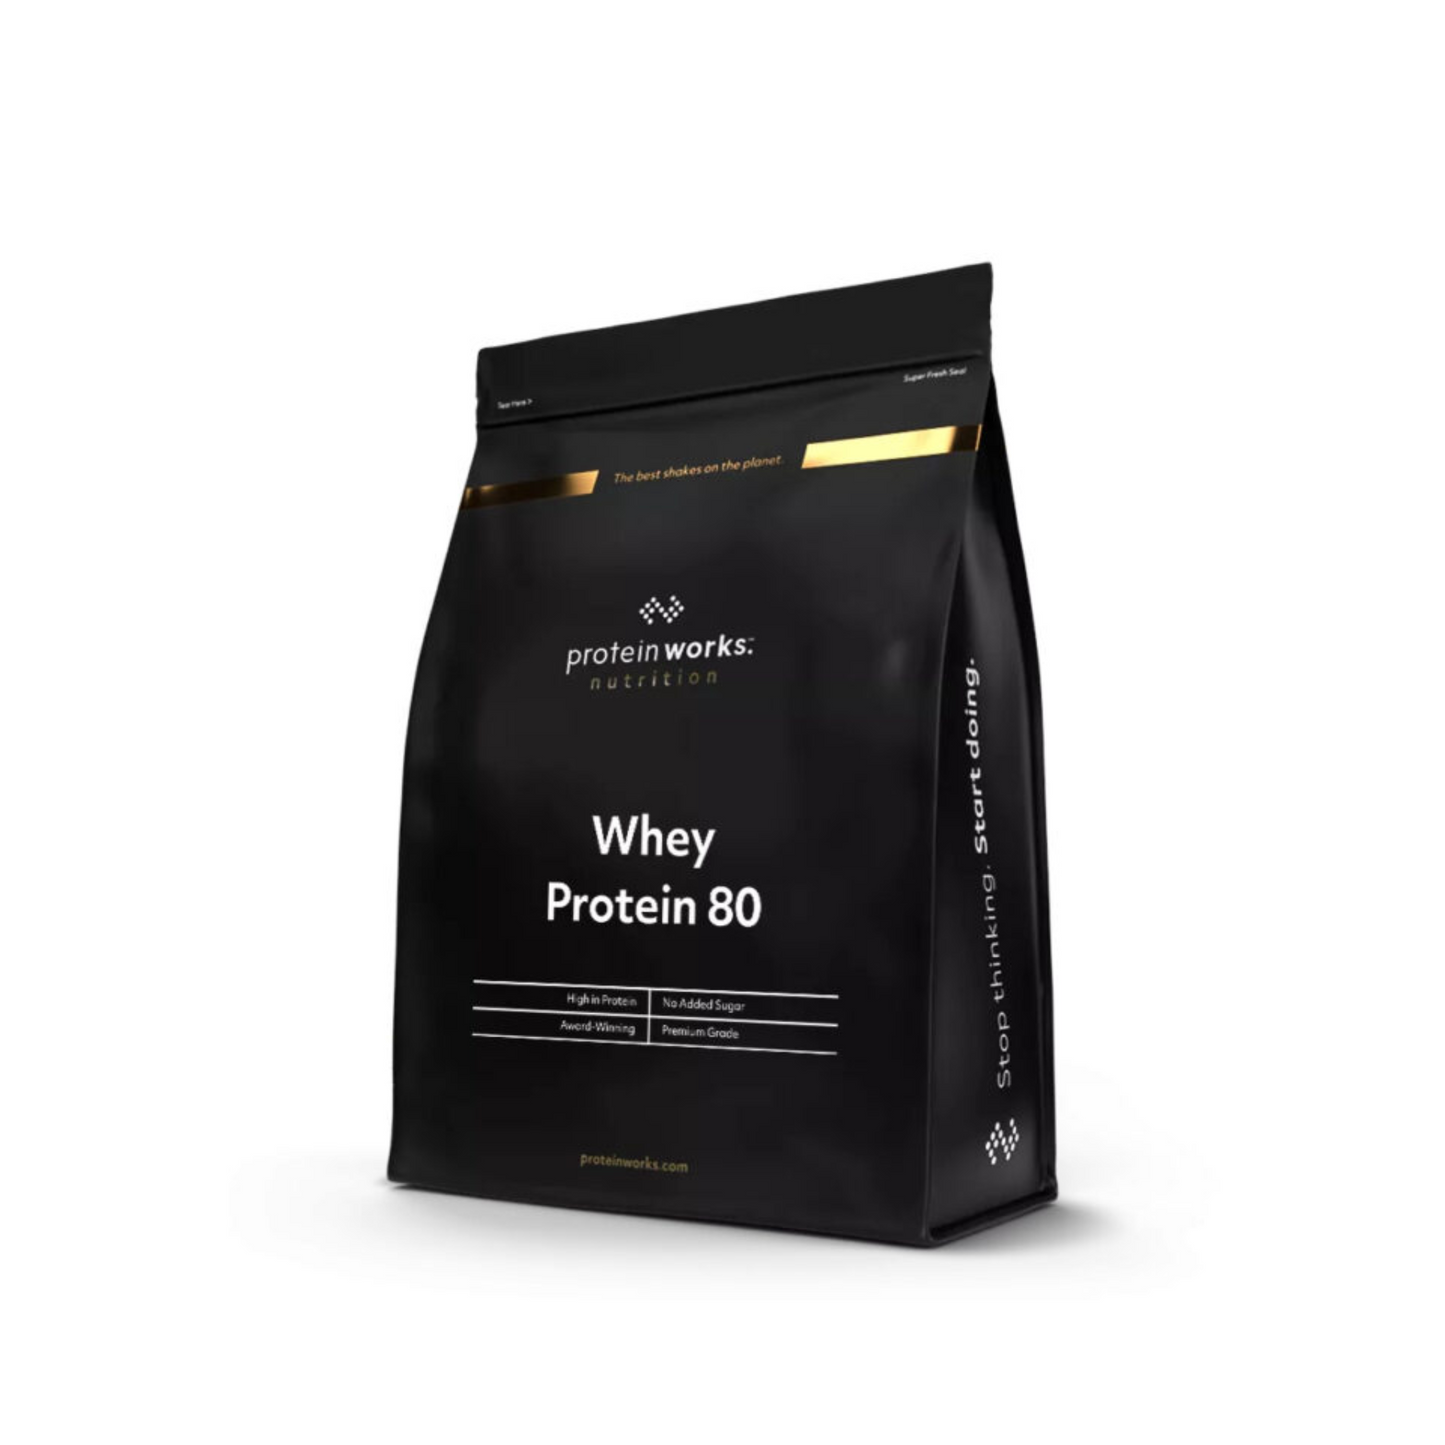 Whey Protein 80 – The Protein Works™ (UK)